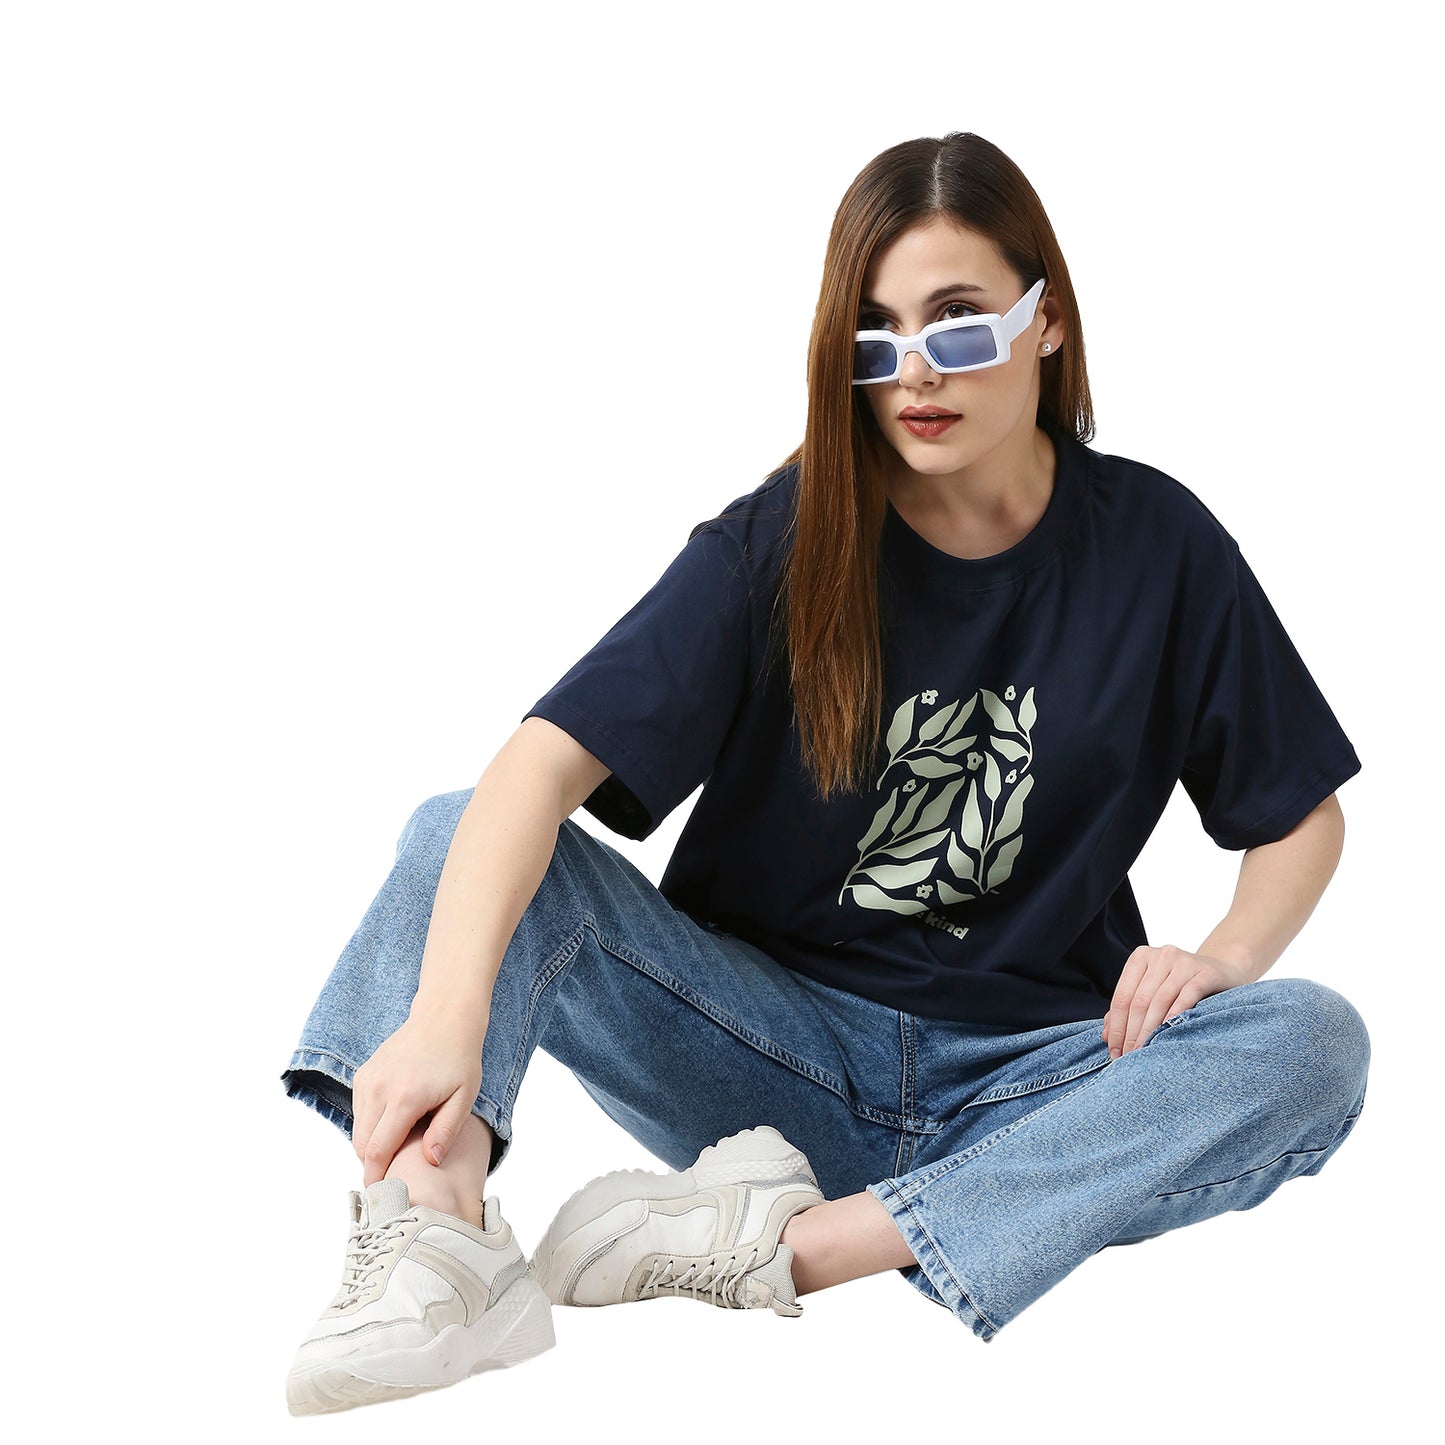 The Relaxed Graphic Tee